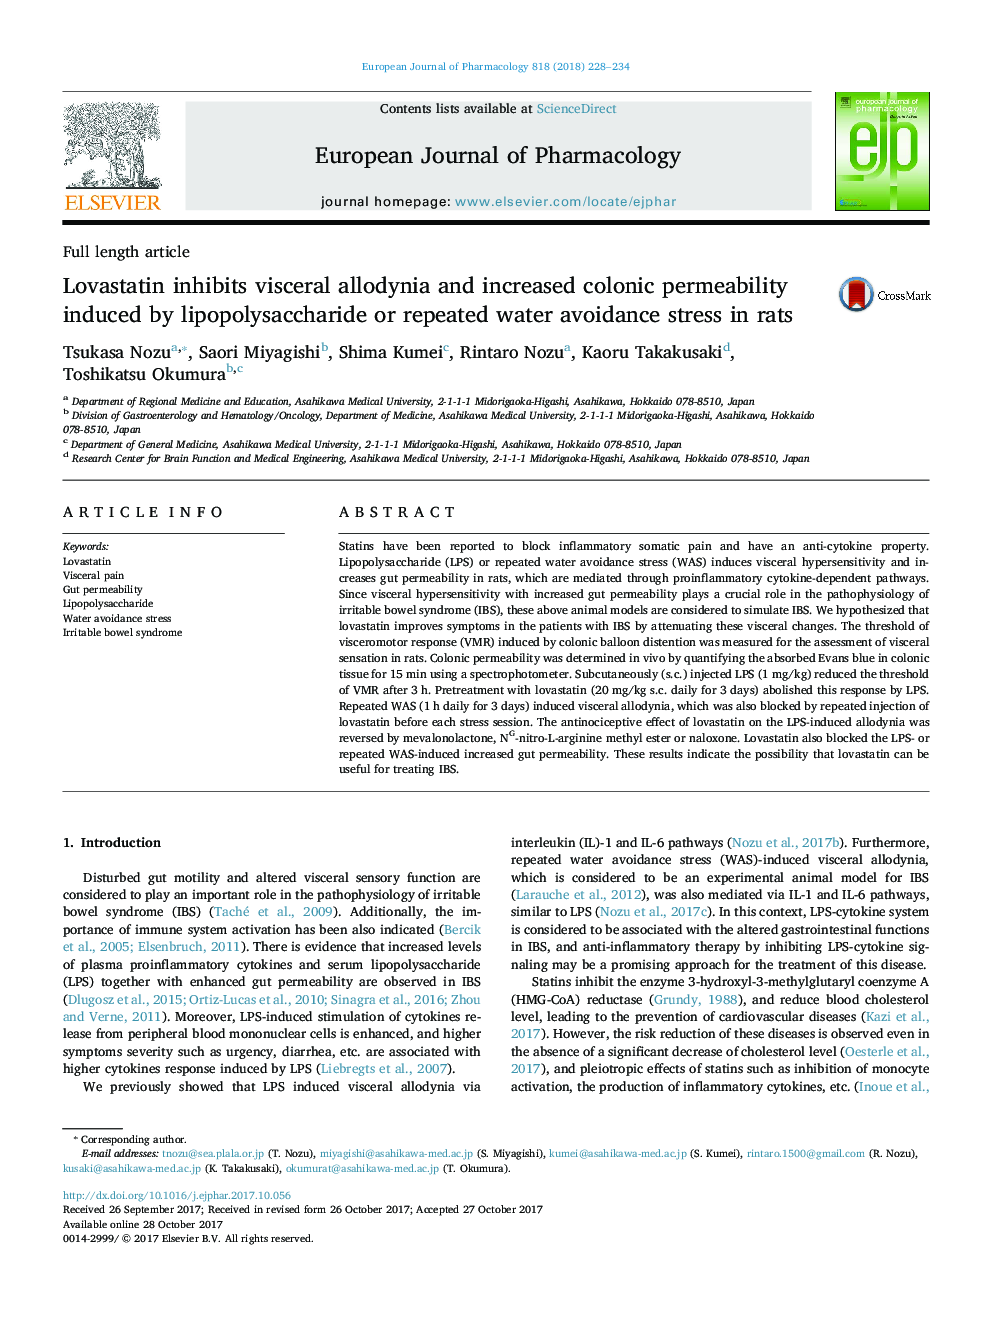 Lovastatin inhibits visceral allodynia and increased colonic permeability induced by lipopolysaccharide or repeated water avoidance stress in rats